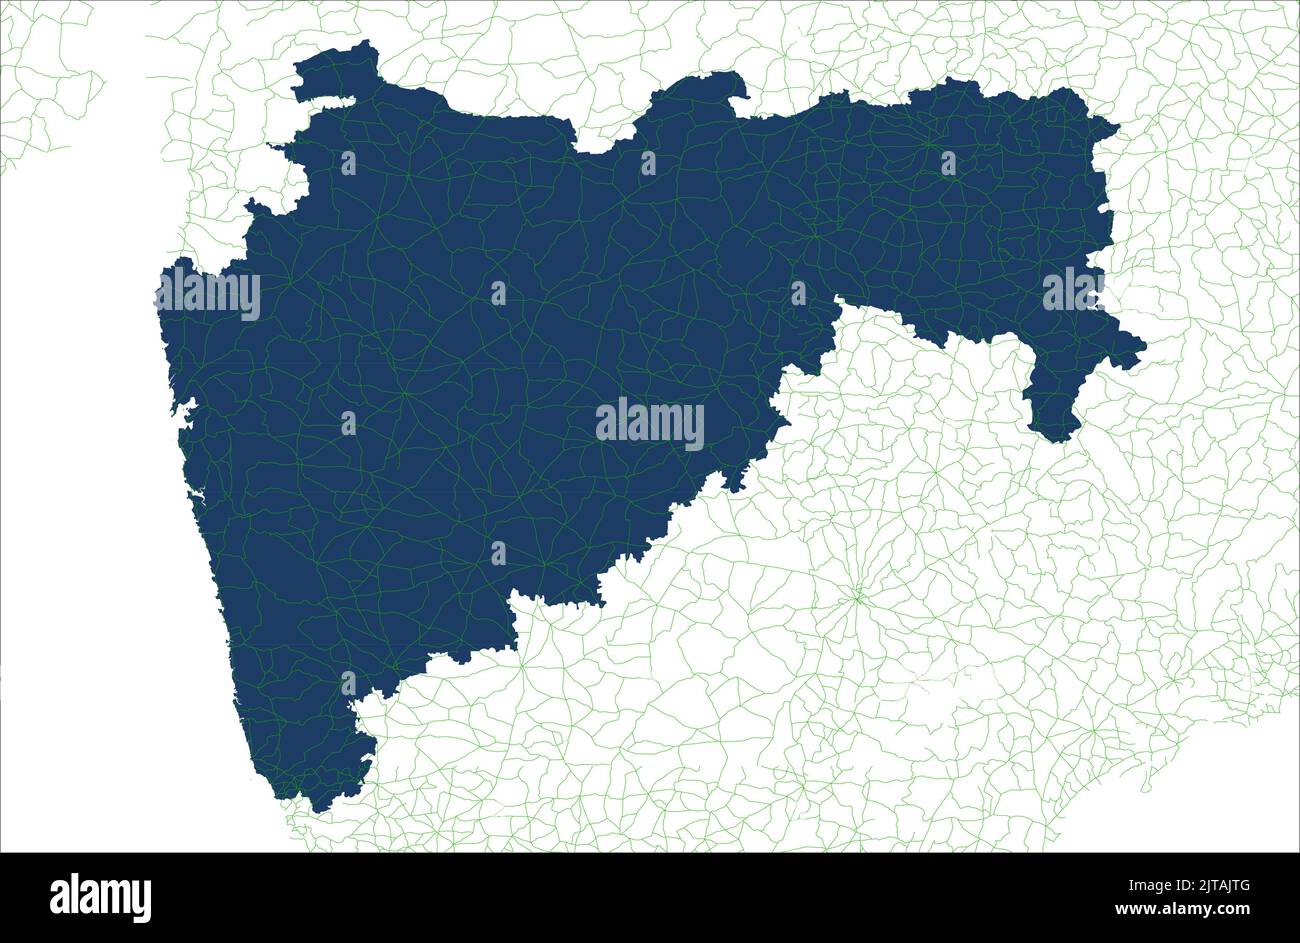 Maharastra India Road Coverage Area Vector map illustration on white background , Road area of Maharastra india Stock Vector